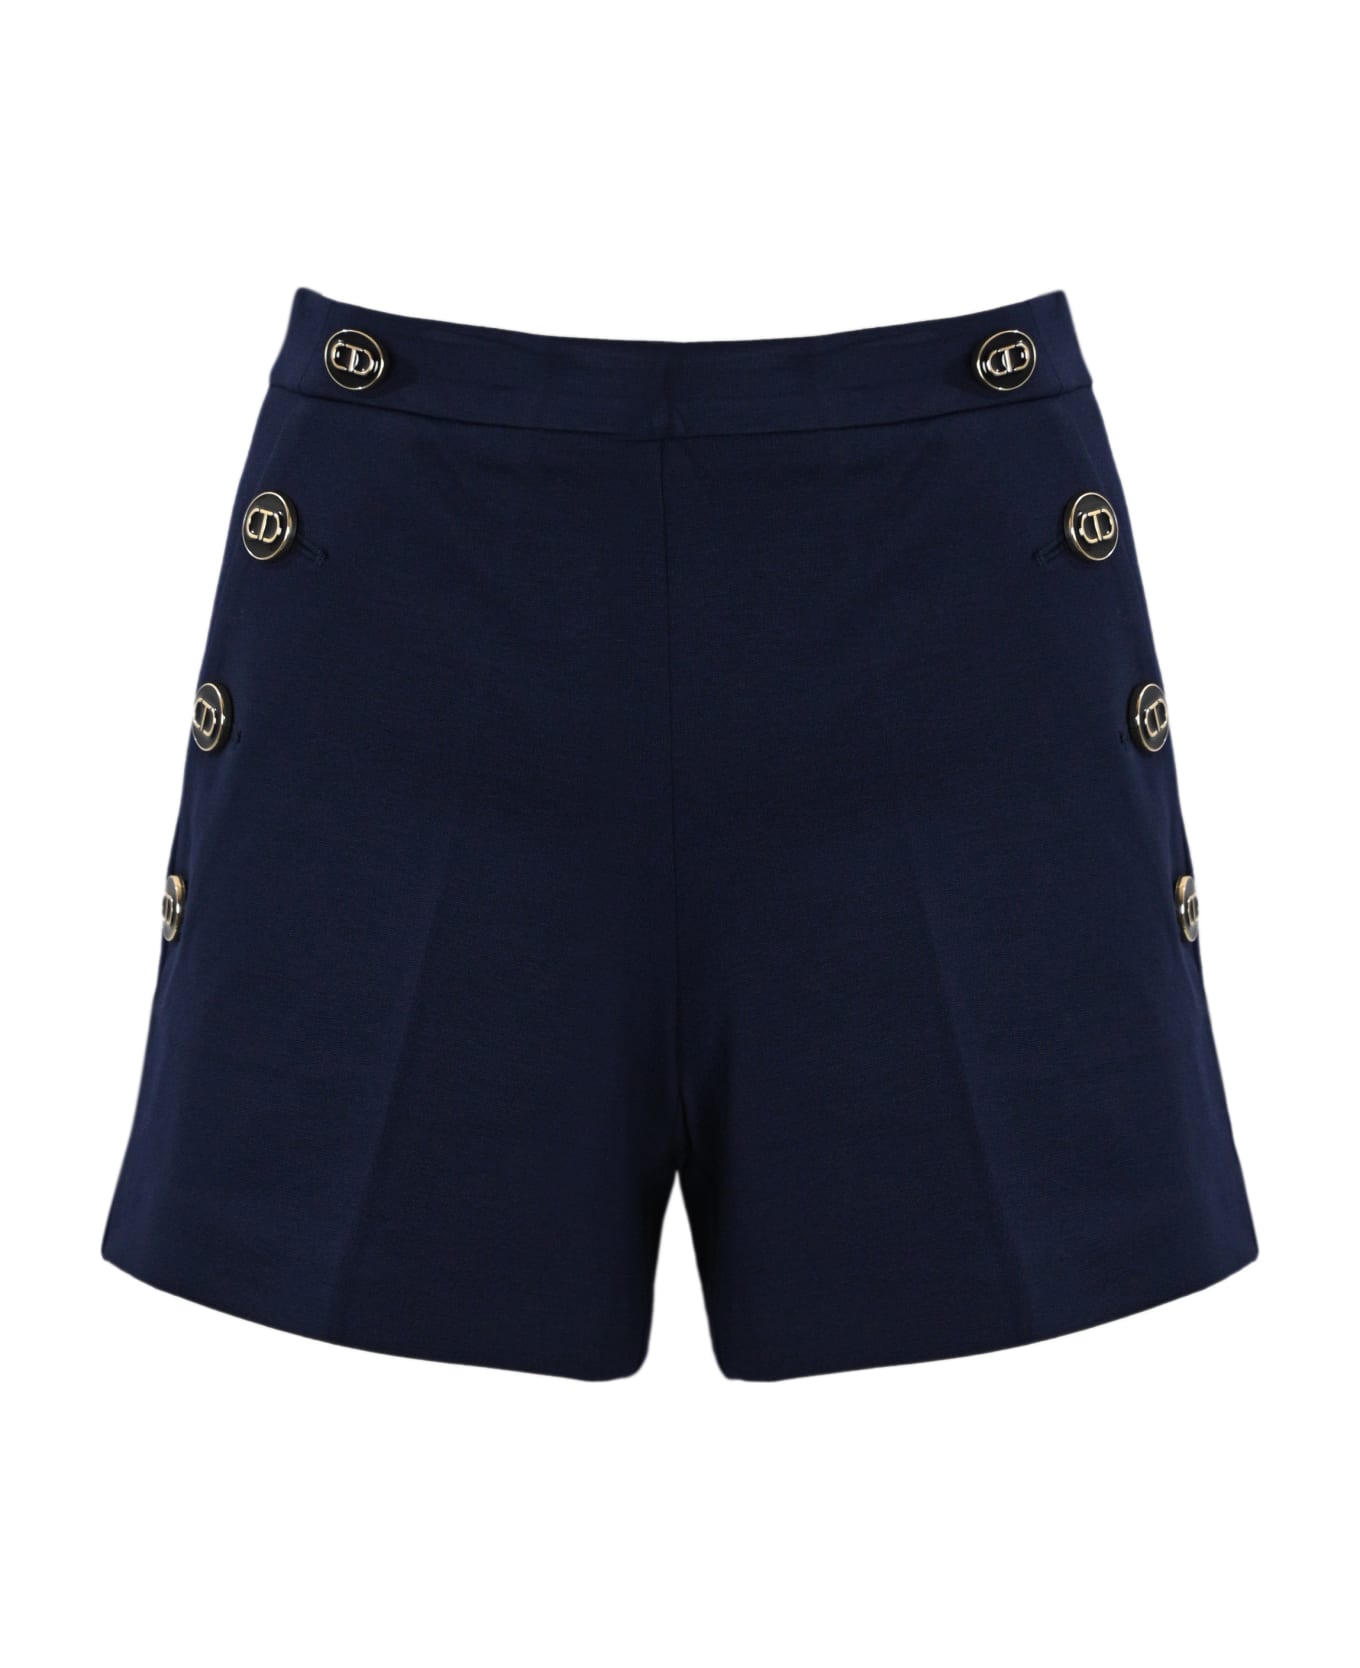 TwinSet Oval T Button Shorts - MID BLU